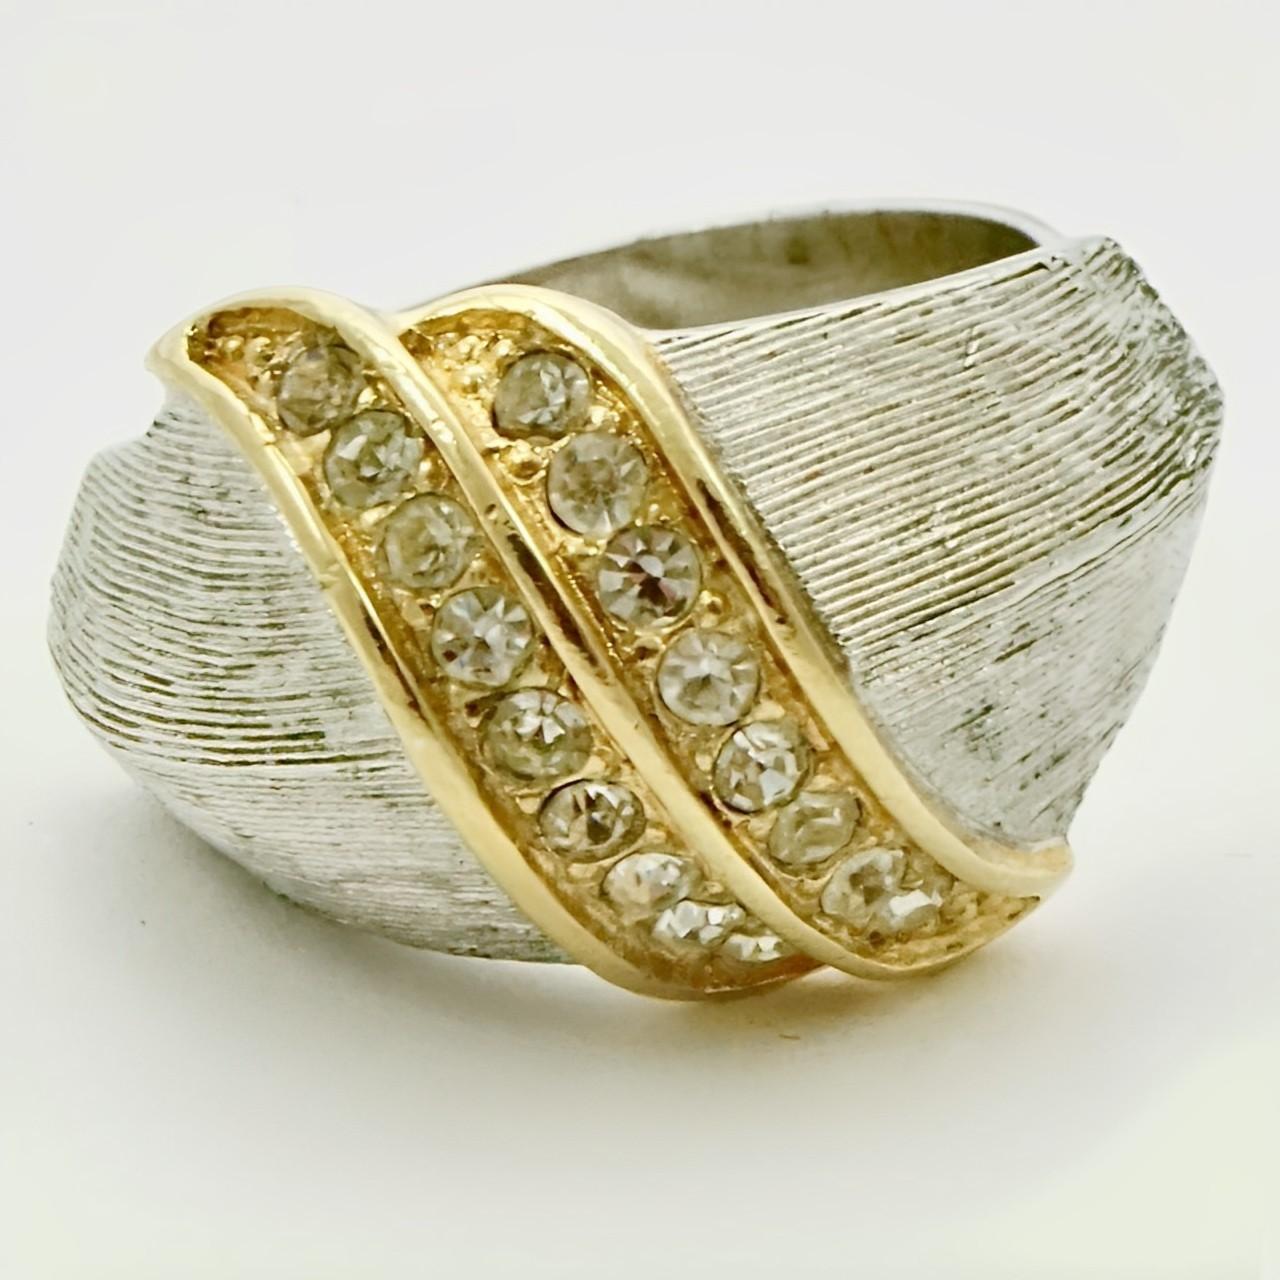 Fabulous Christian Dior gold and silver plated ring featuring a double row of clear rhinestones edged in gold plating. Ring size UK L 1/2, US 5 7/8, but adjustable. The front measures length 1.3cm / 1.18 inch.

This is a beautiful and stylish